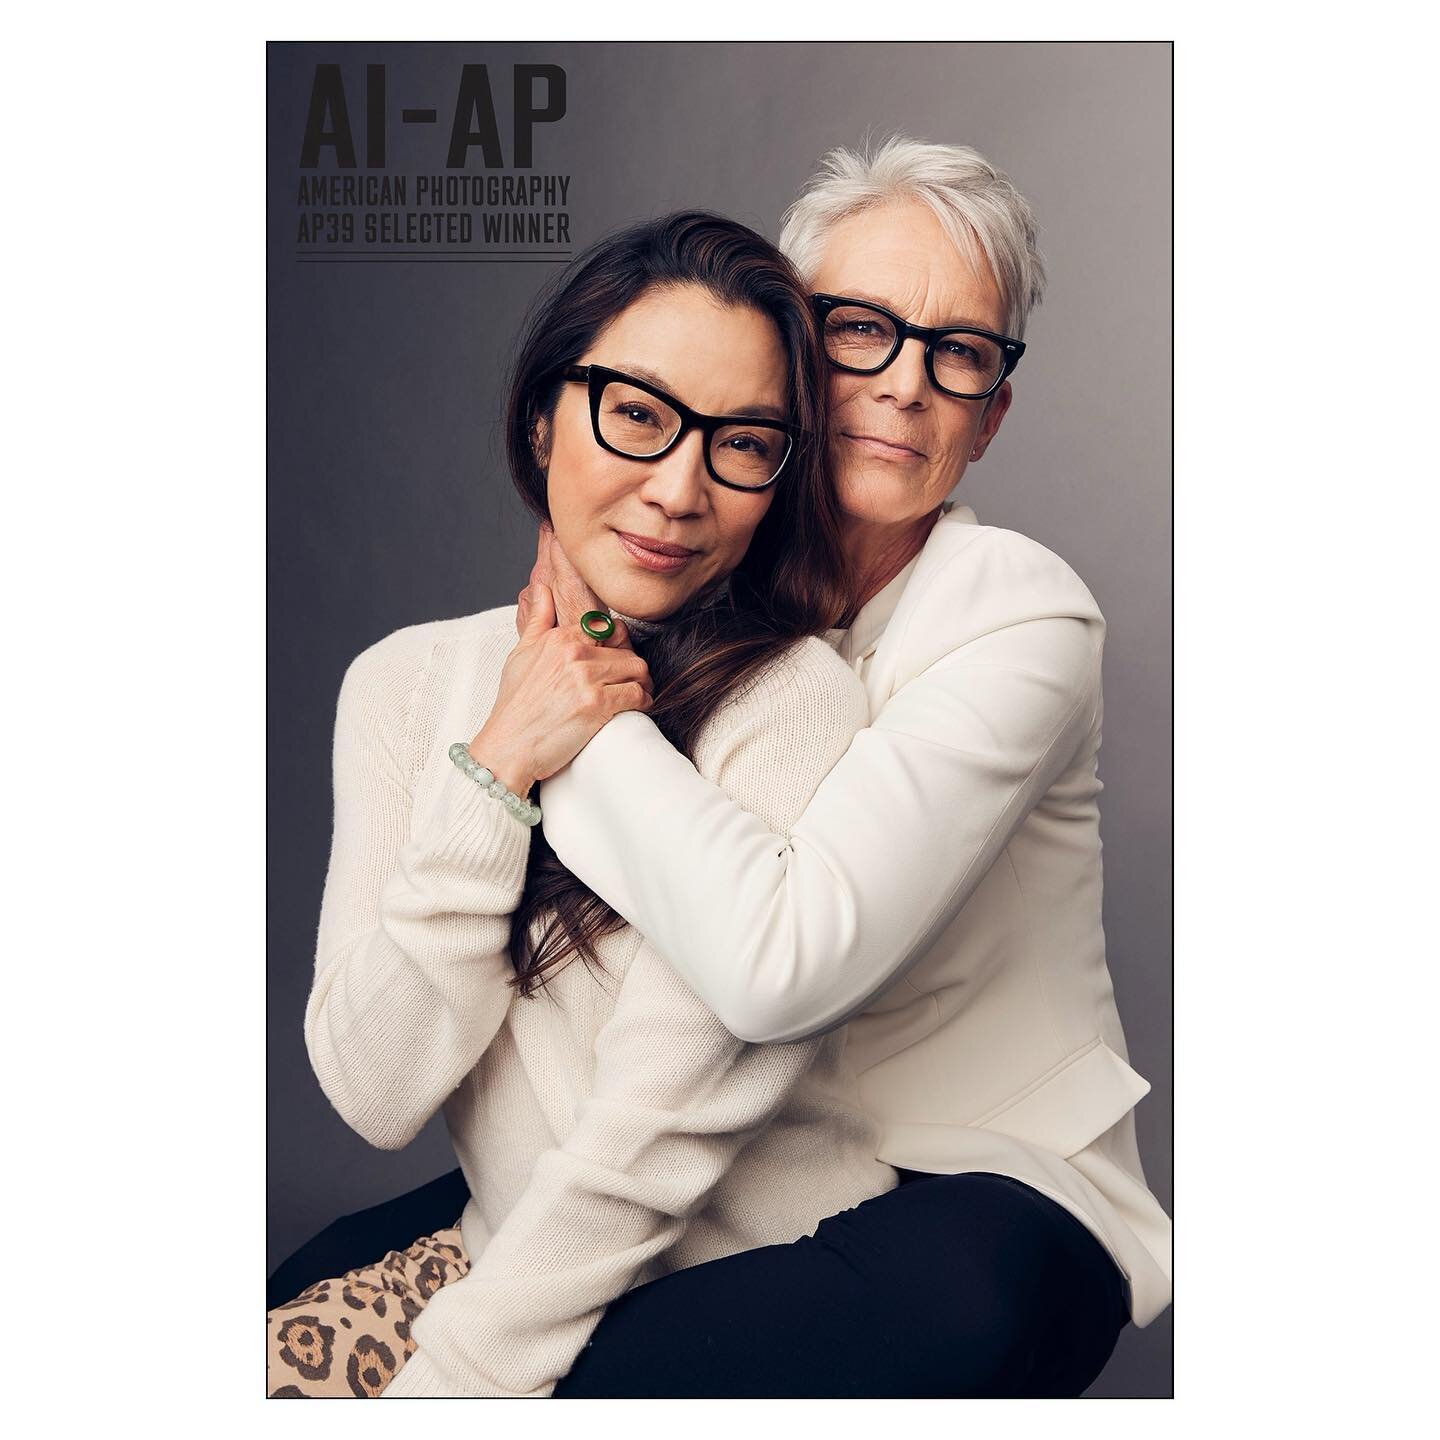 💥AP39💥
Cool week seeing so many friends get selected for the American Photography AP39 annual this go around!
Stoked to take two images selected for the book🤘🏽

Image 1: Michelle Yeoh &amp; Jamie Lee Curtis- 2 Oscar winners, one portrait. Photogr